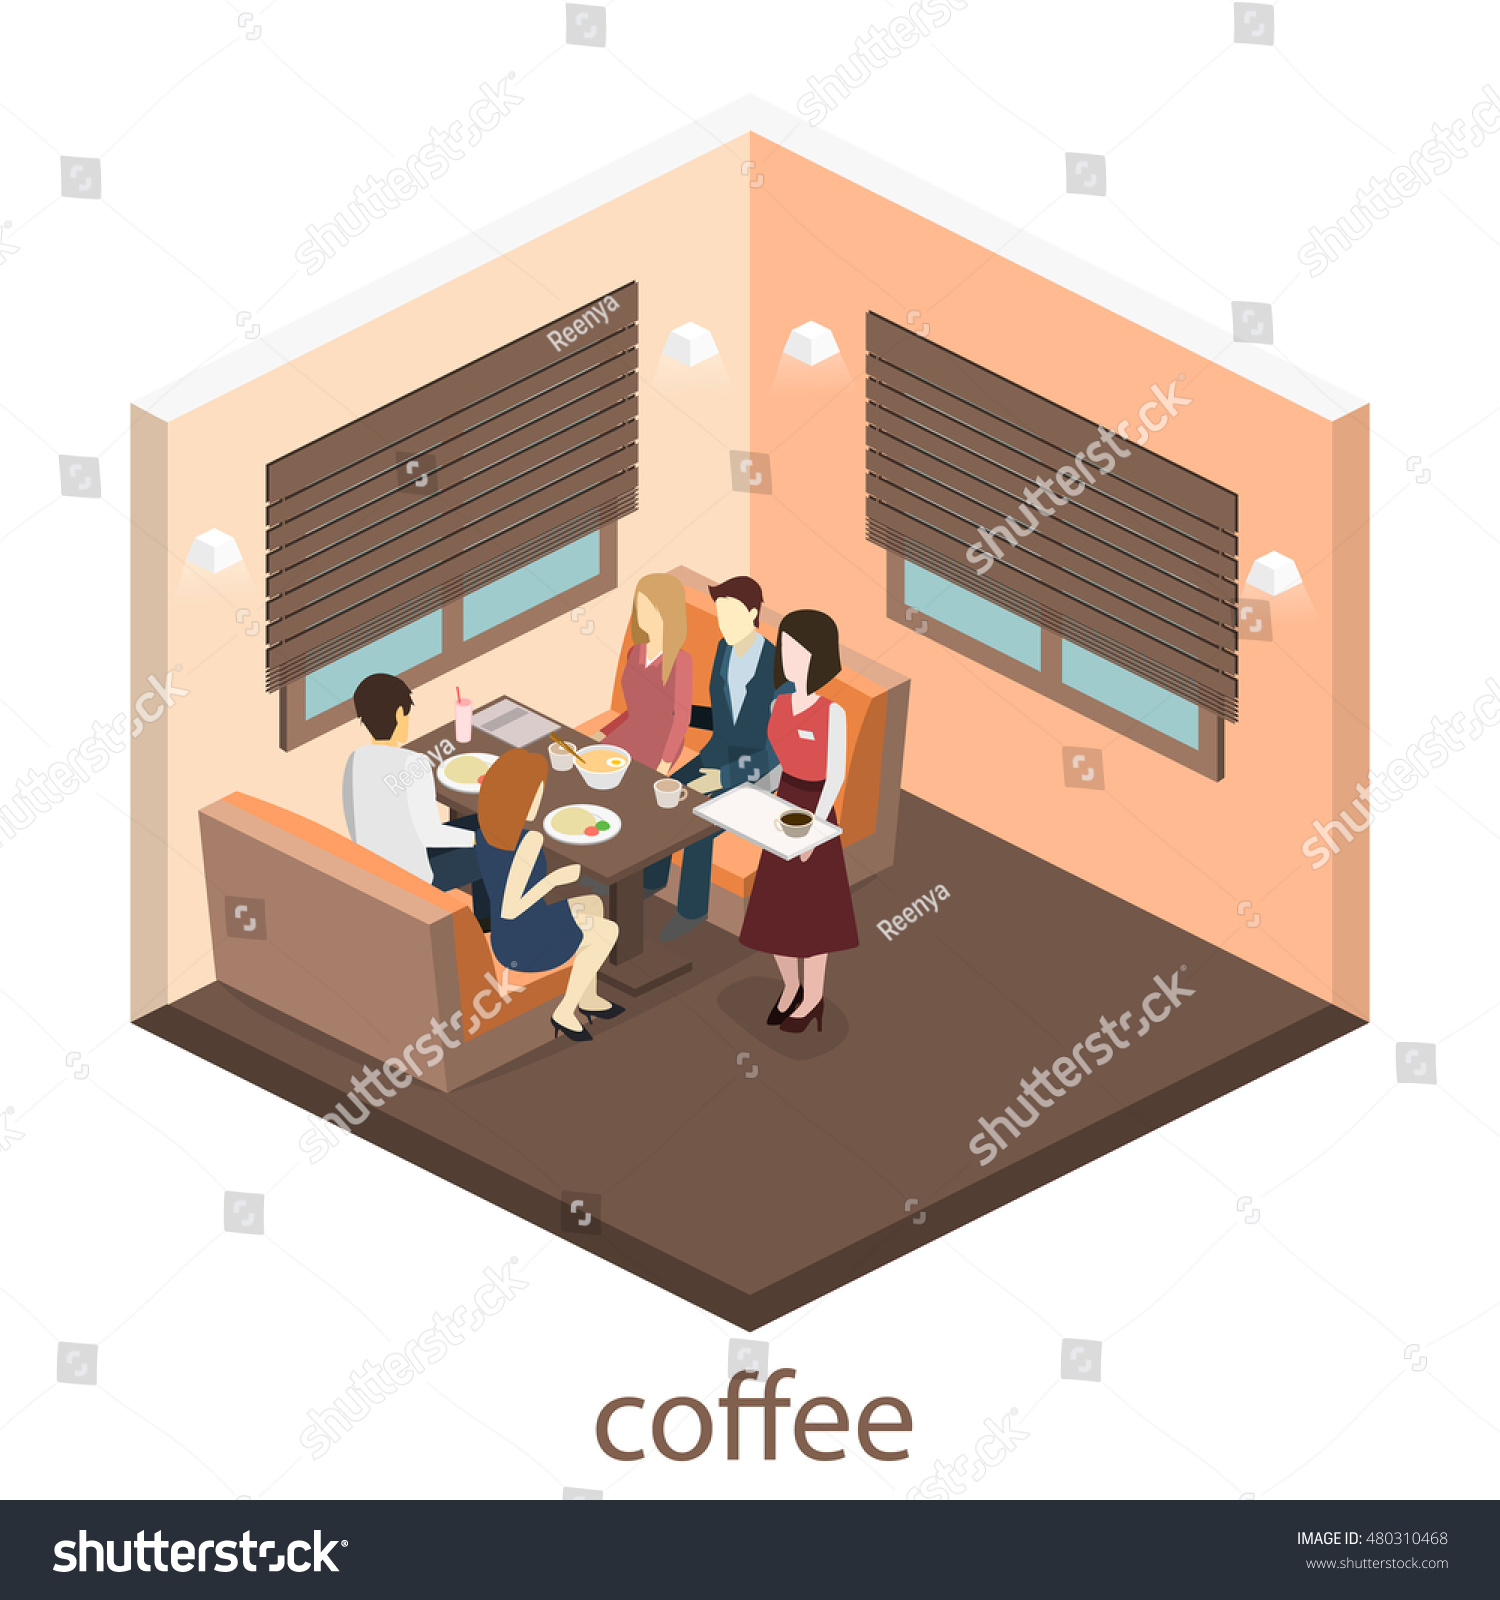 Isometric Interior Coffee Shop Flat 3d Stock Vector Royalty